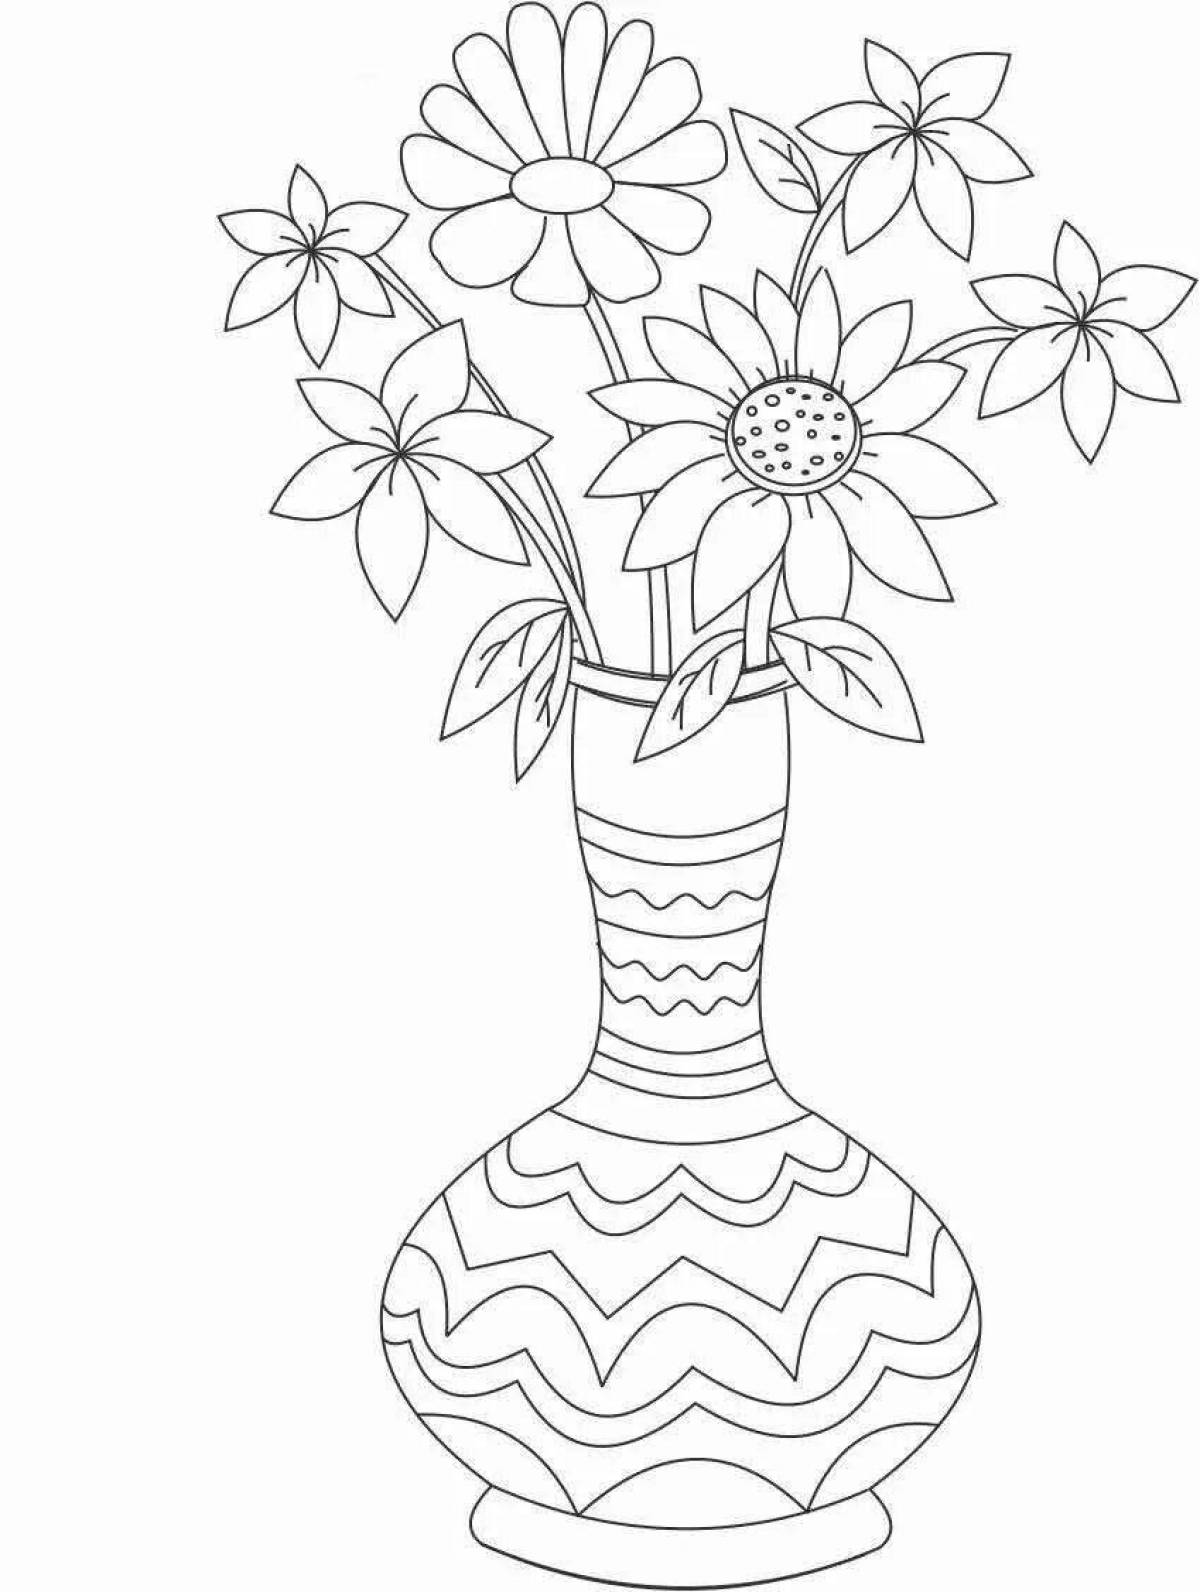 Glitter vase coloring page